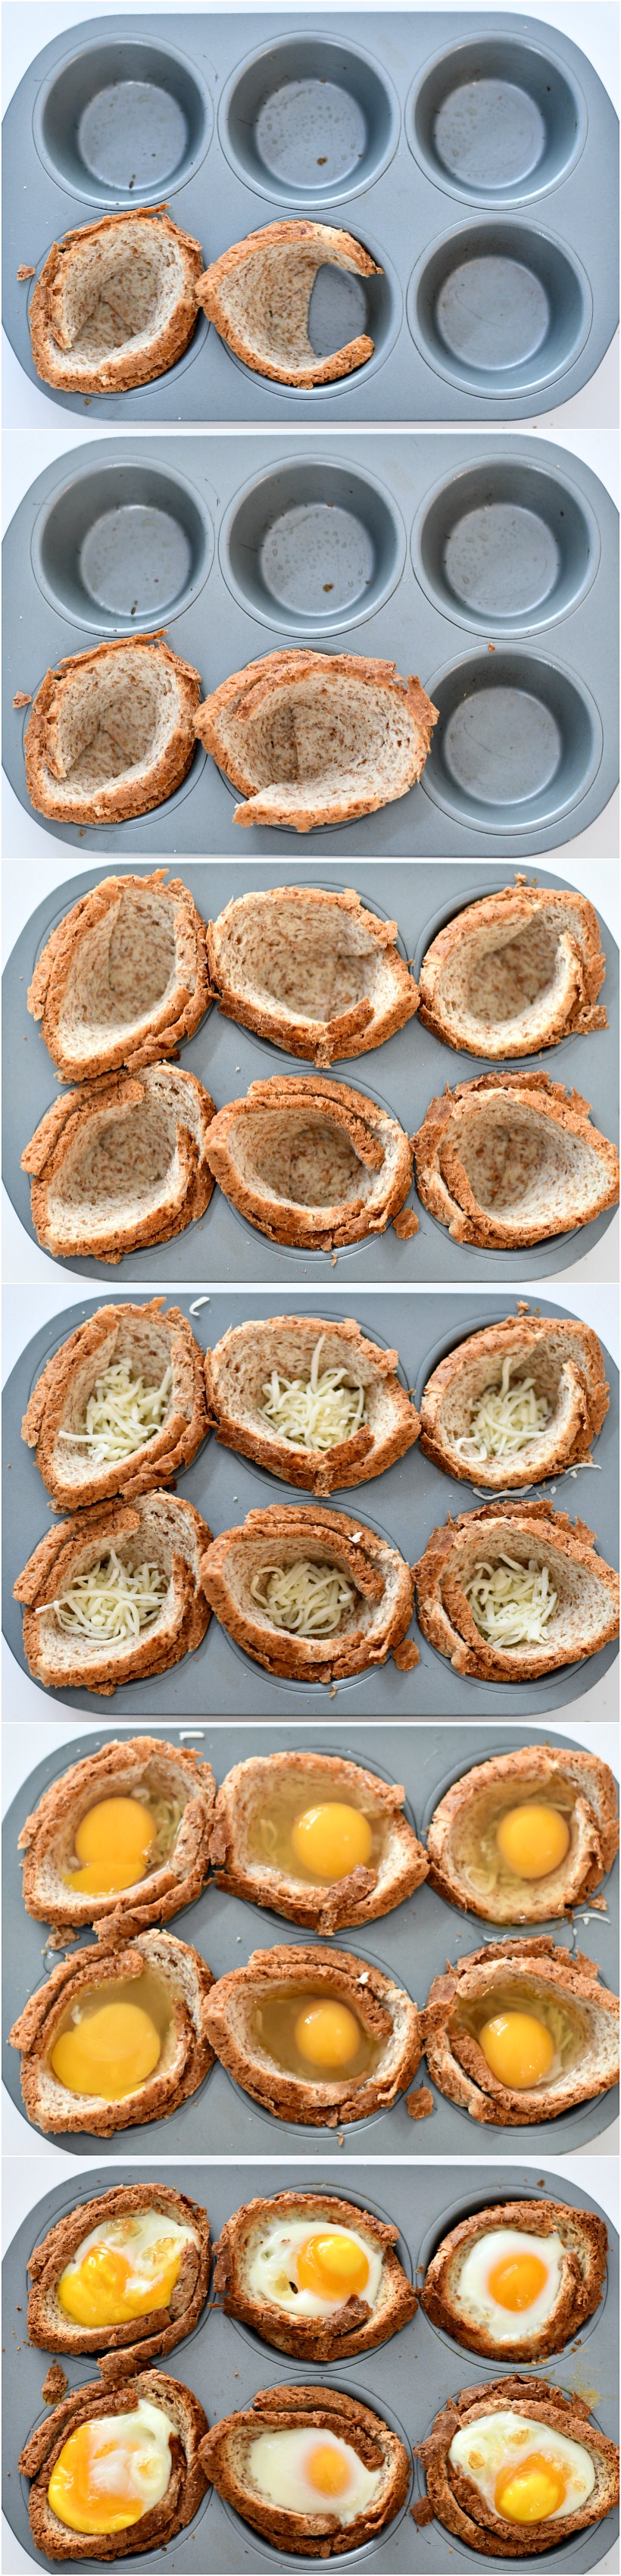 A photo tutorial of how to make Egg and Toast Cups by filling bread into a muffin tin, filling with eggs, and baking.